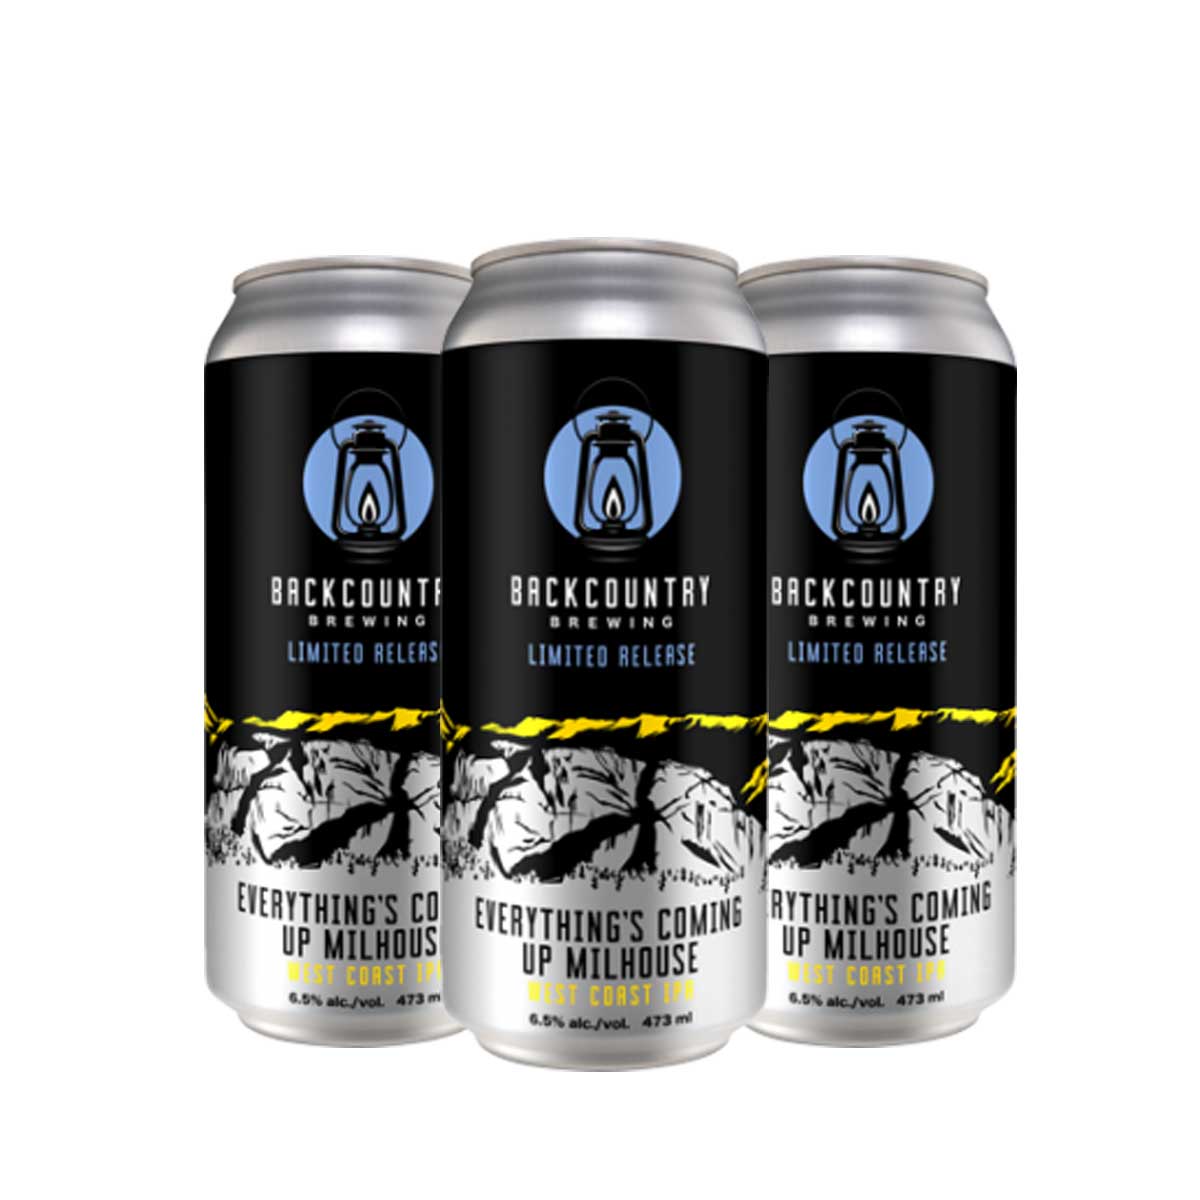 TAG Liquor Stores BC - Backcountry Brewing "Everything's Coming Up Milhouse" West Coast IPA 4 Pack Cans